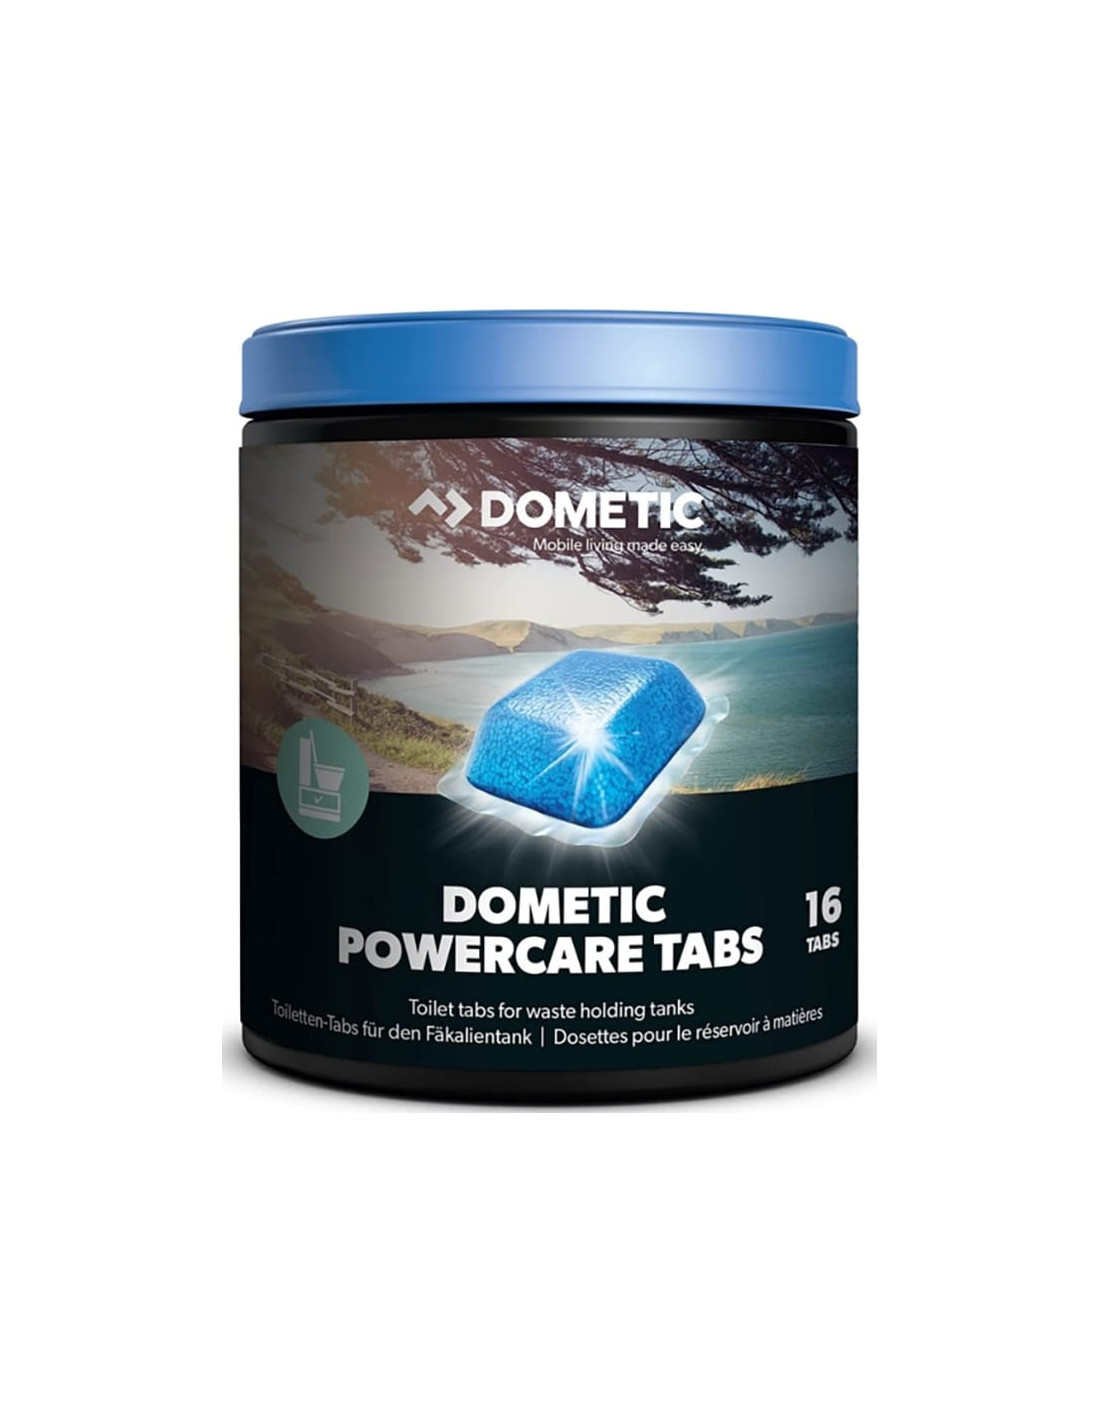 DOMETIC POWERCARE TABS